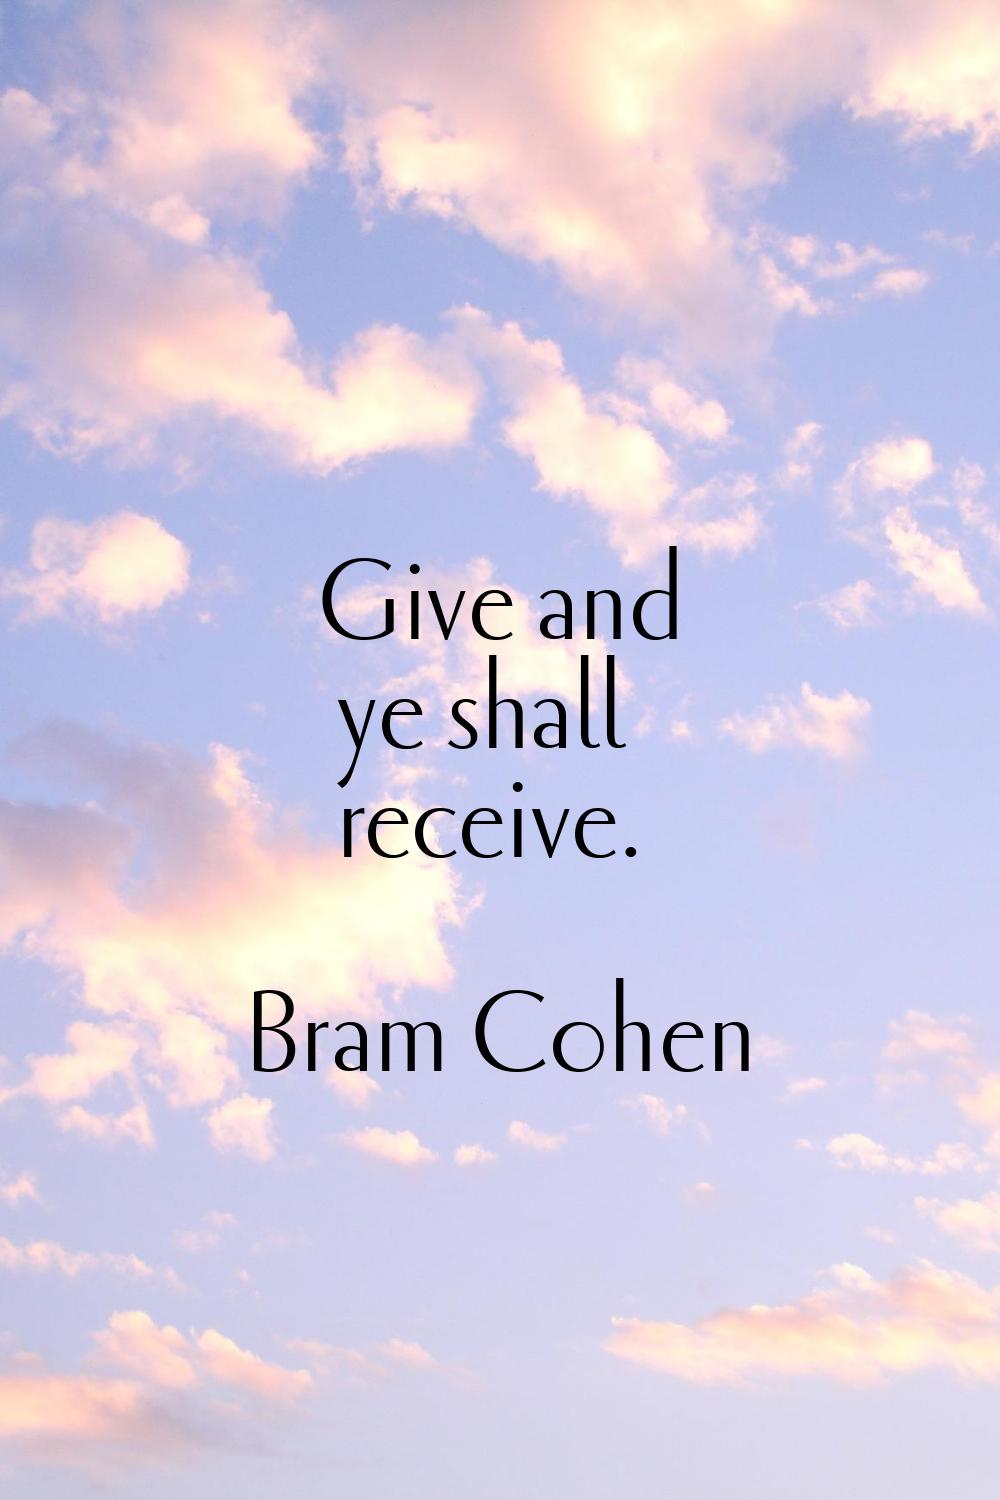 Give and ye shall receive.